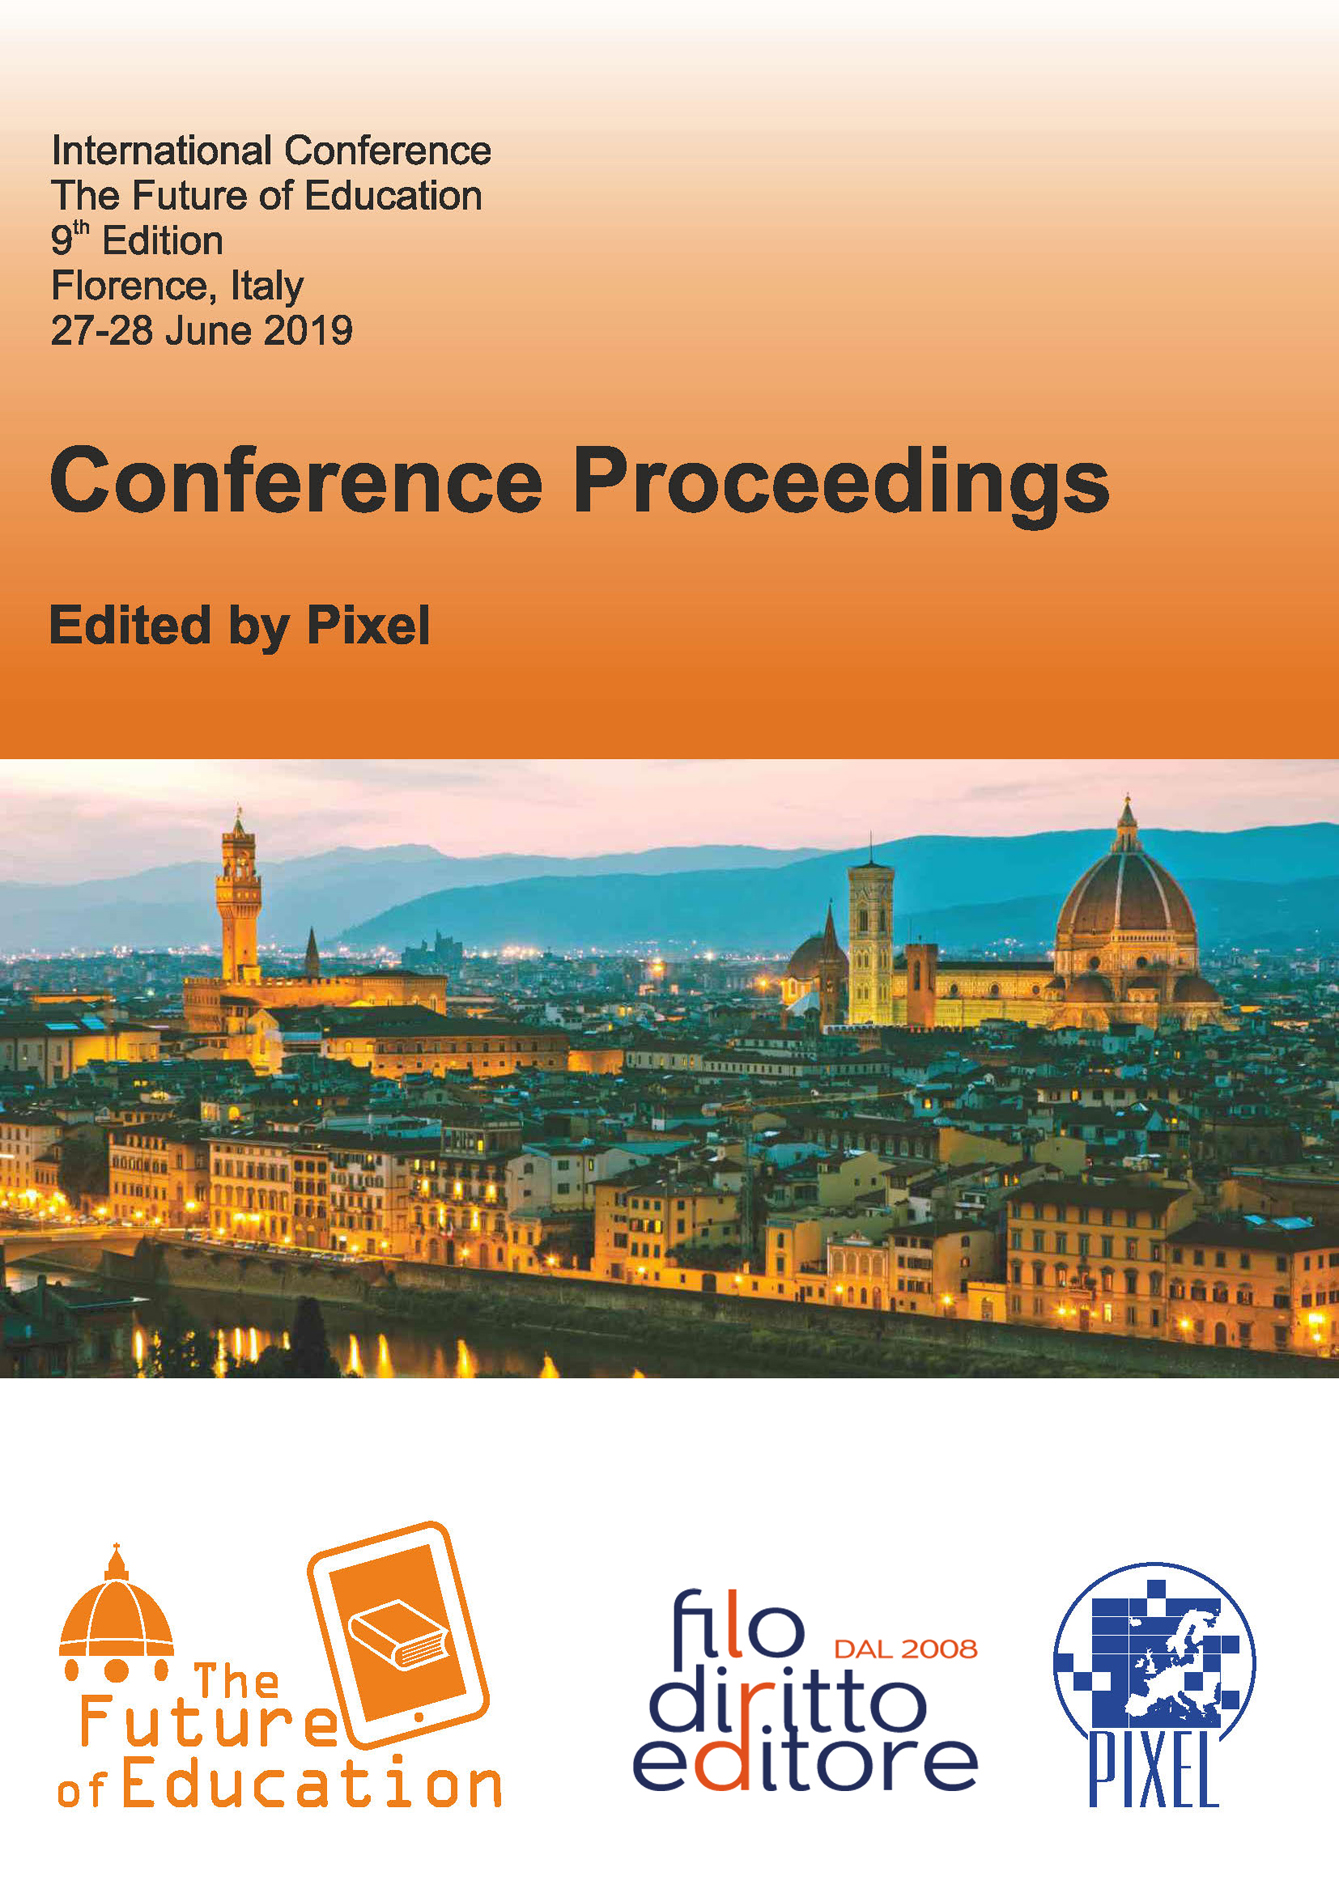 9th International Conference The Future of Education (Florence, Italy, 27-28 June 2019)